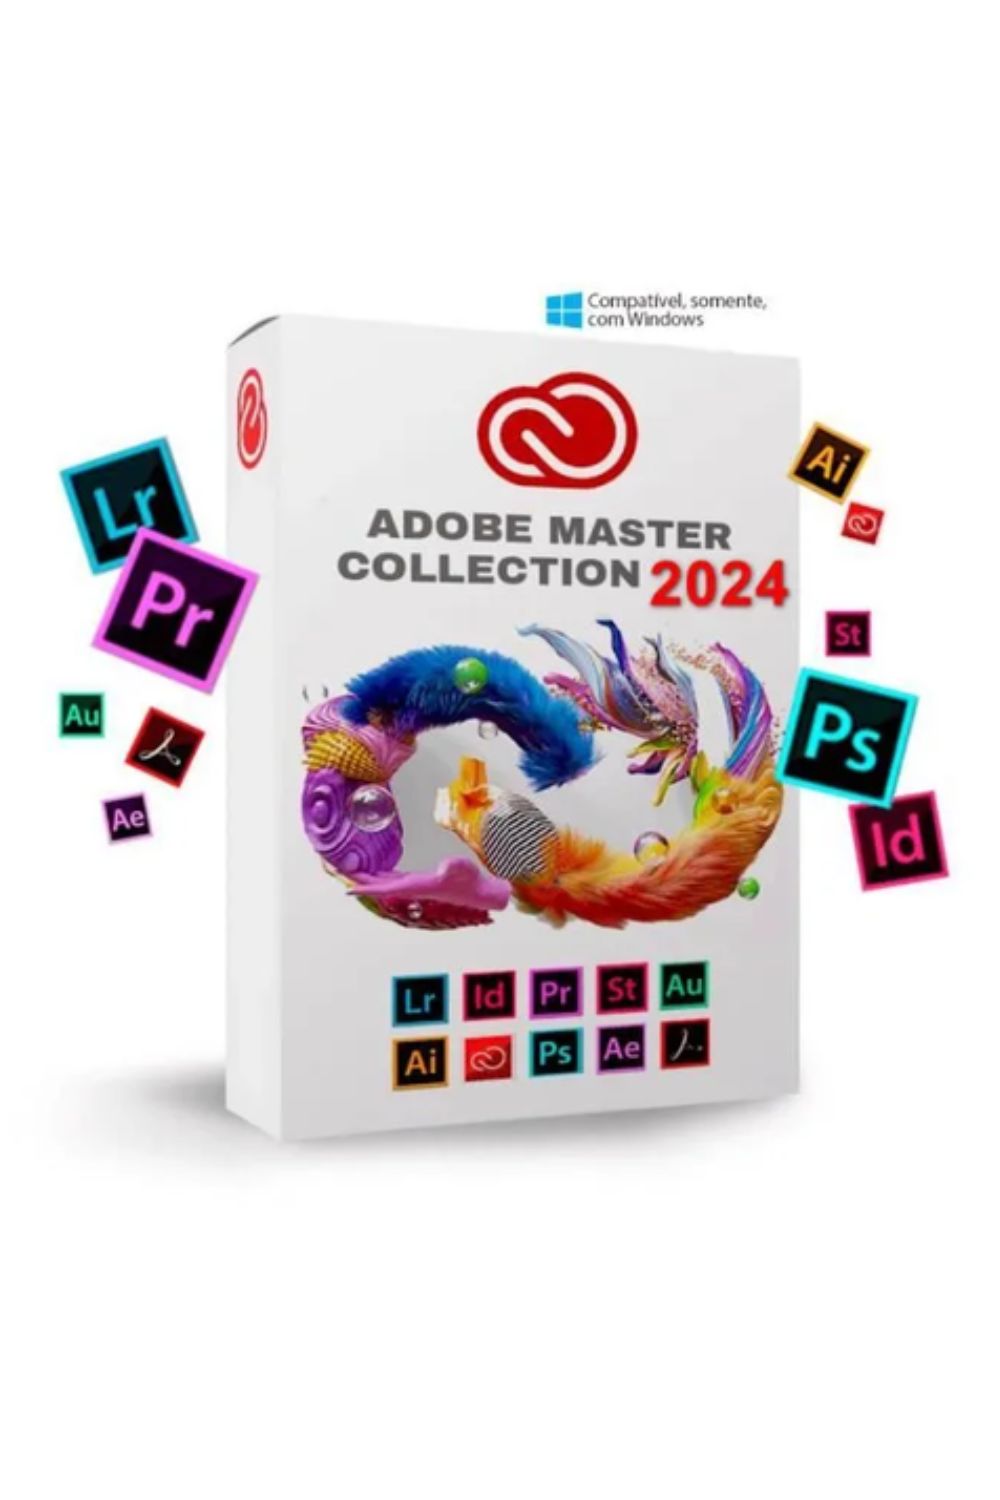 Adobe Master Collection 2024 pinterest preview image.